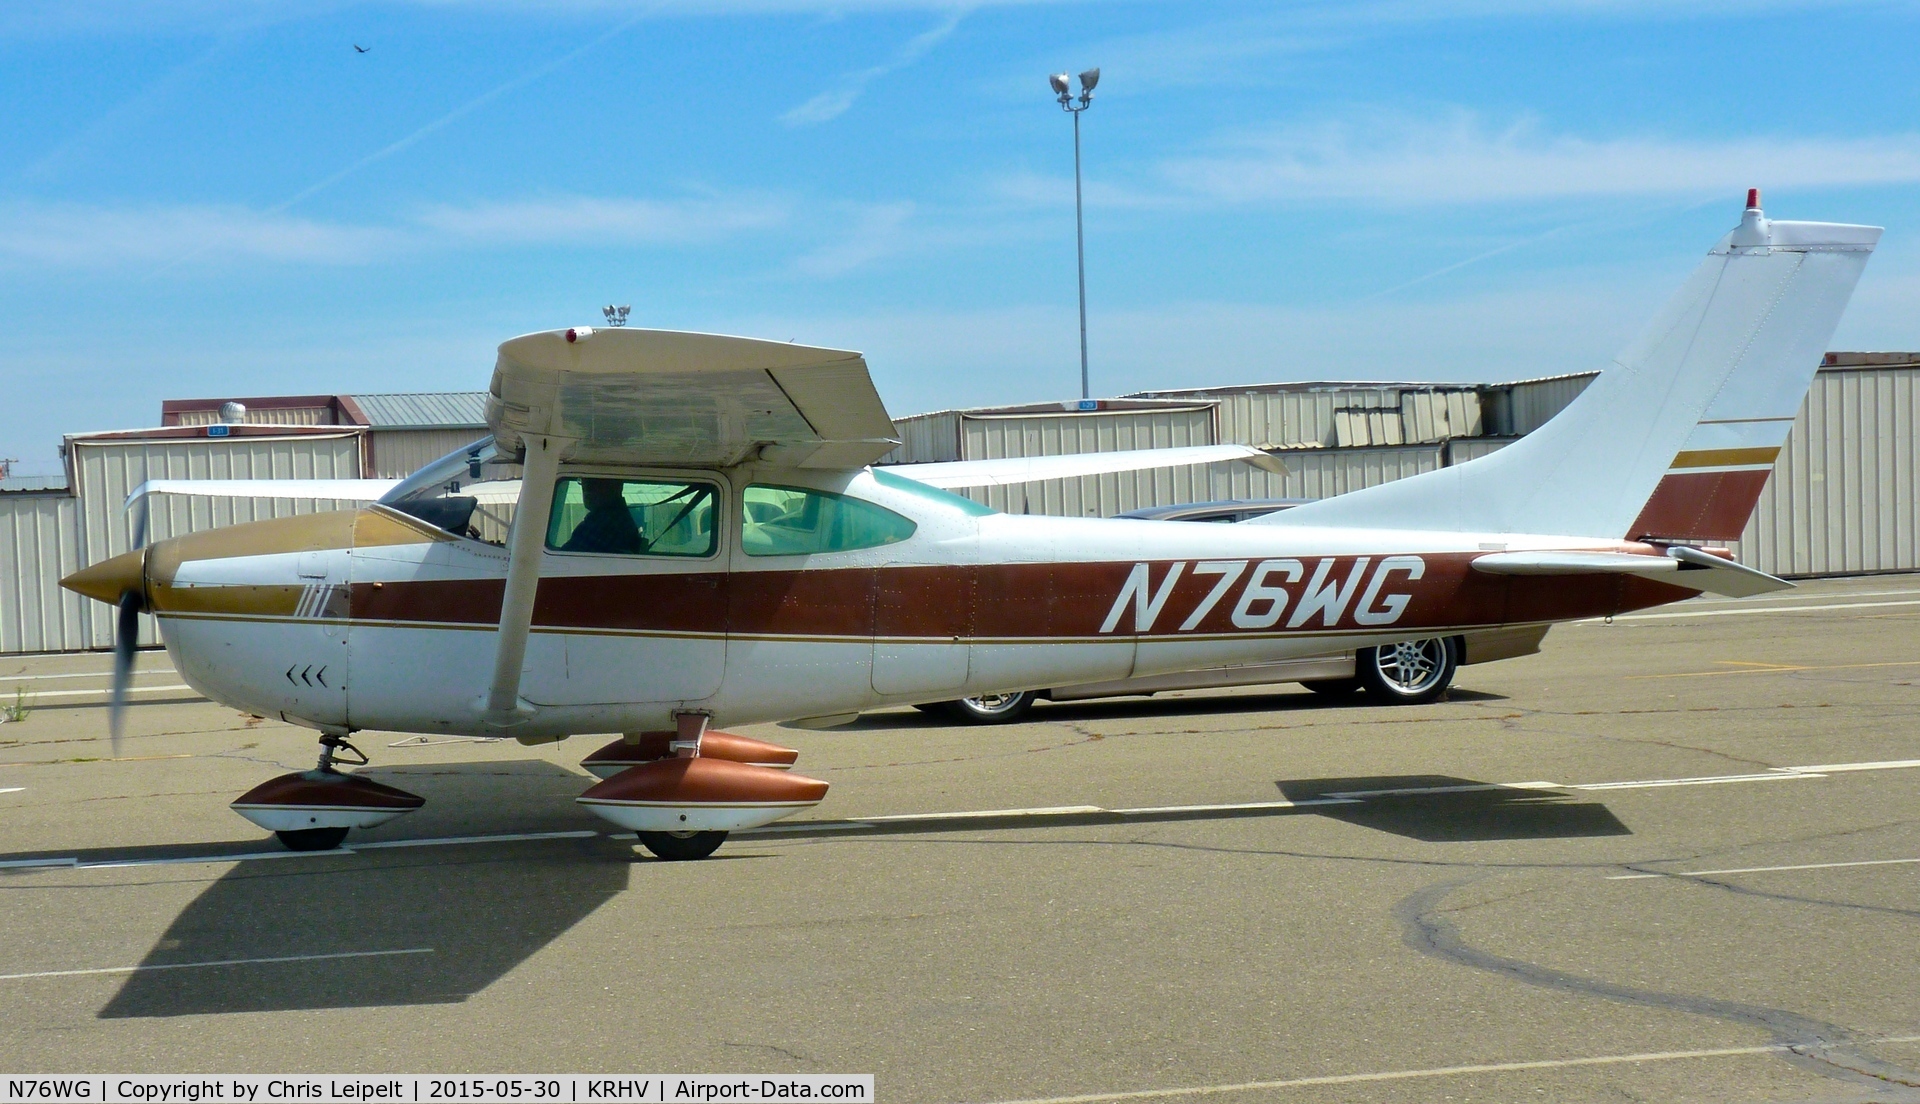 N76WG, 1964 Cessna 182H Skylane C/N 18255867, Locally-based 1964 Cessna 182H taxing to its tie down at Reid Hillview Airport, San Jose, CA.